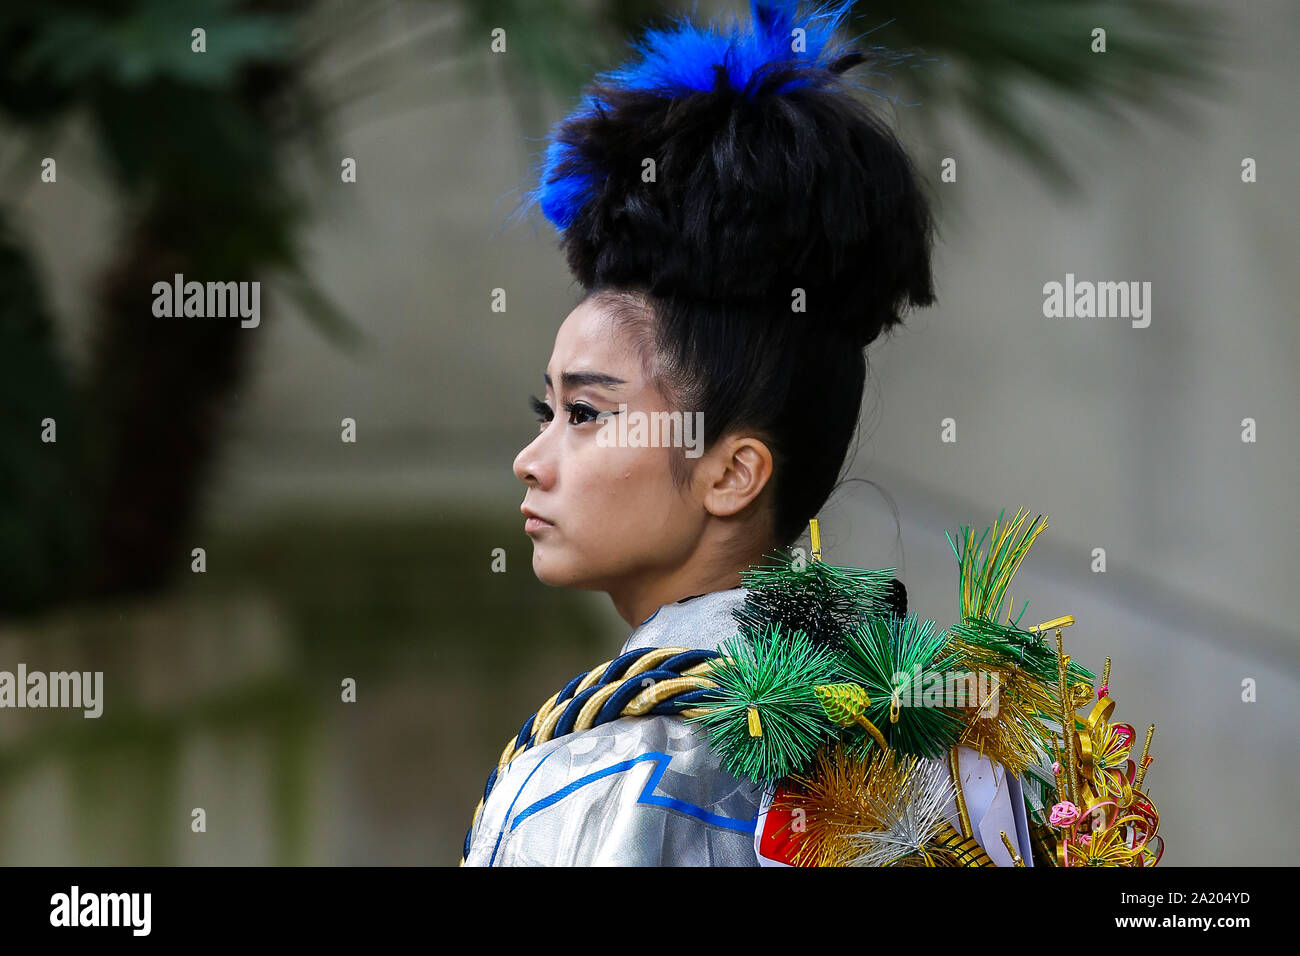 London, UK. 29th Sep, 2019. A performer wearing Japanese costume seen during the annual Japan Matsuri festival.Festival of Japanese music, food and culture in London's Trafalgar Square, UK. Credit: SOPA Images Limited/Alamy Live News Stock Photo